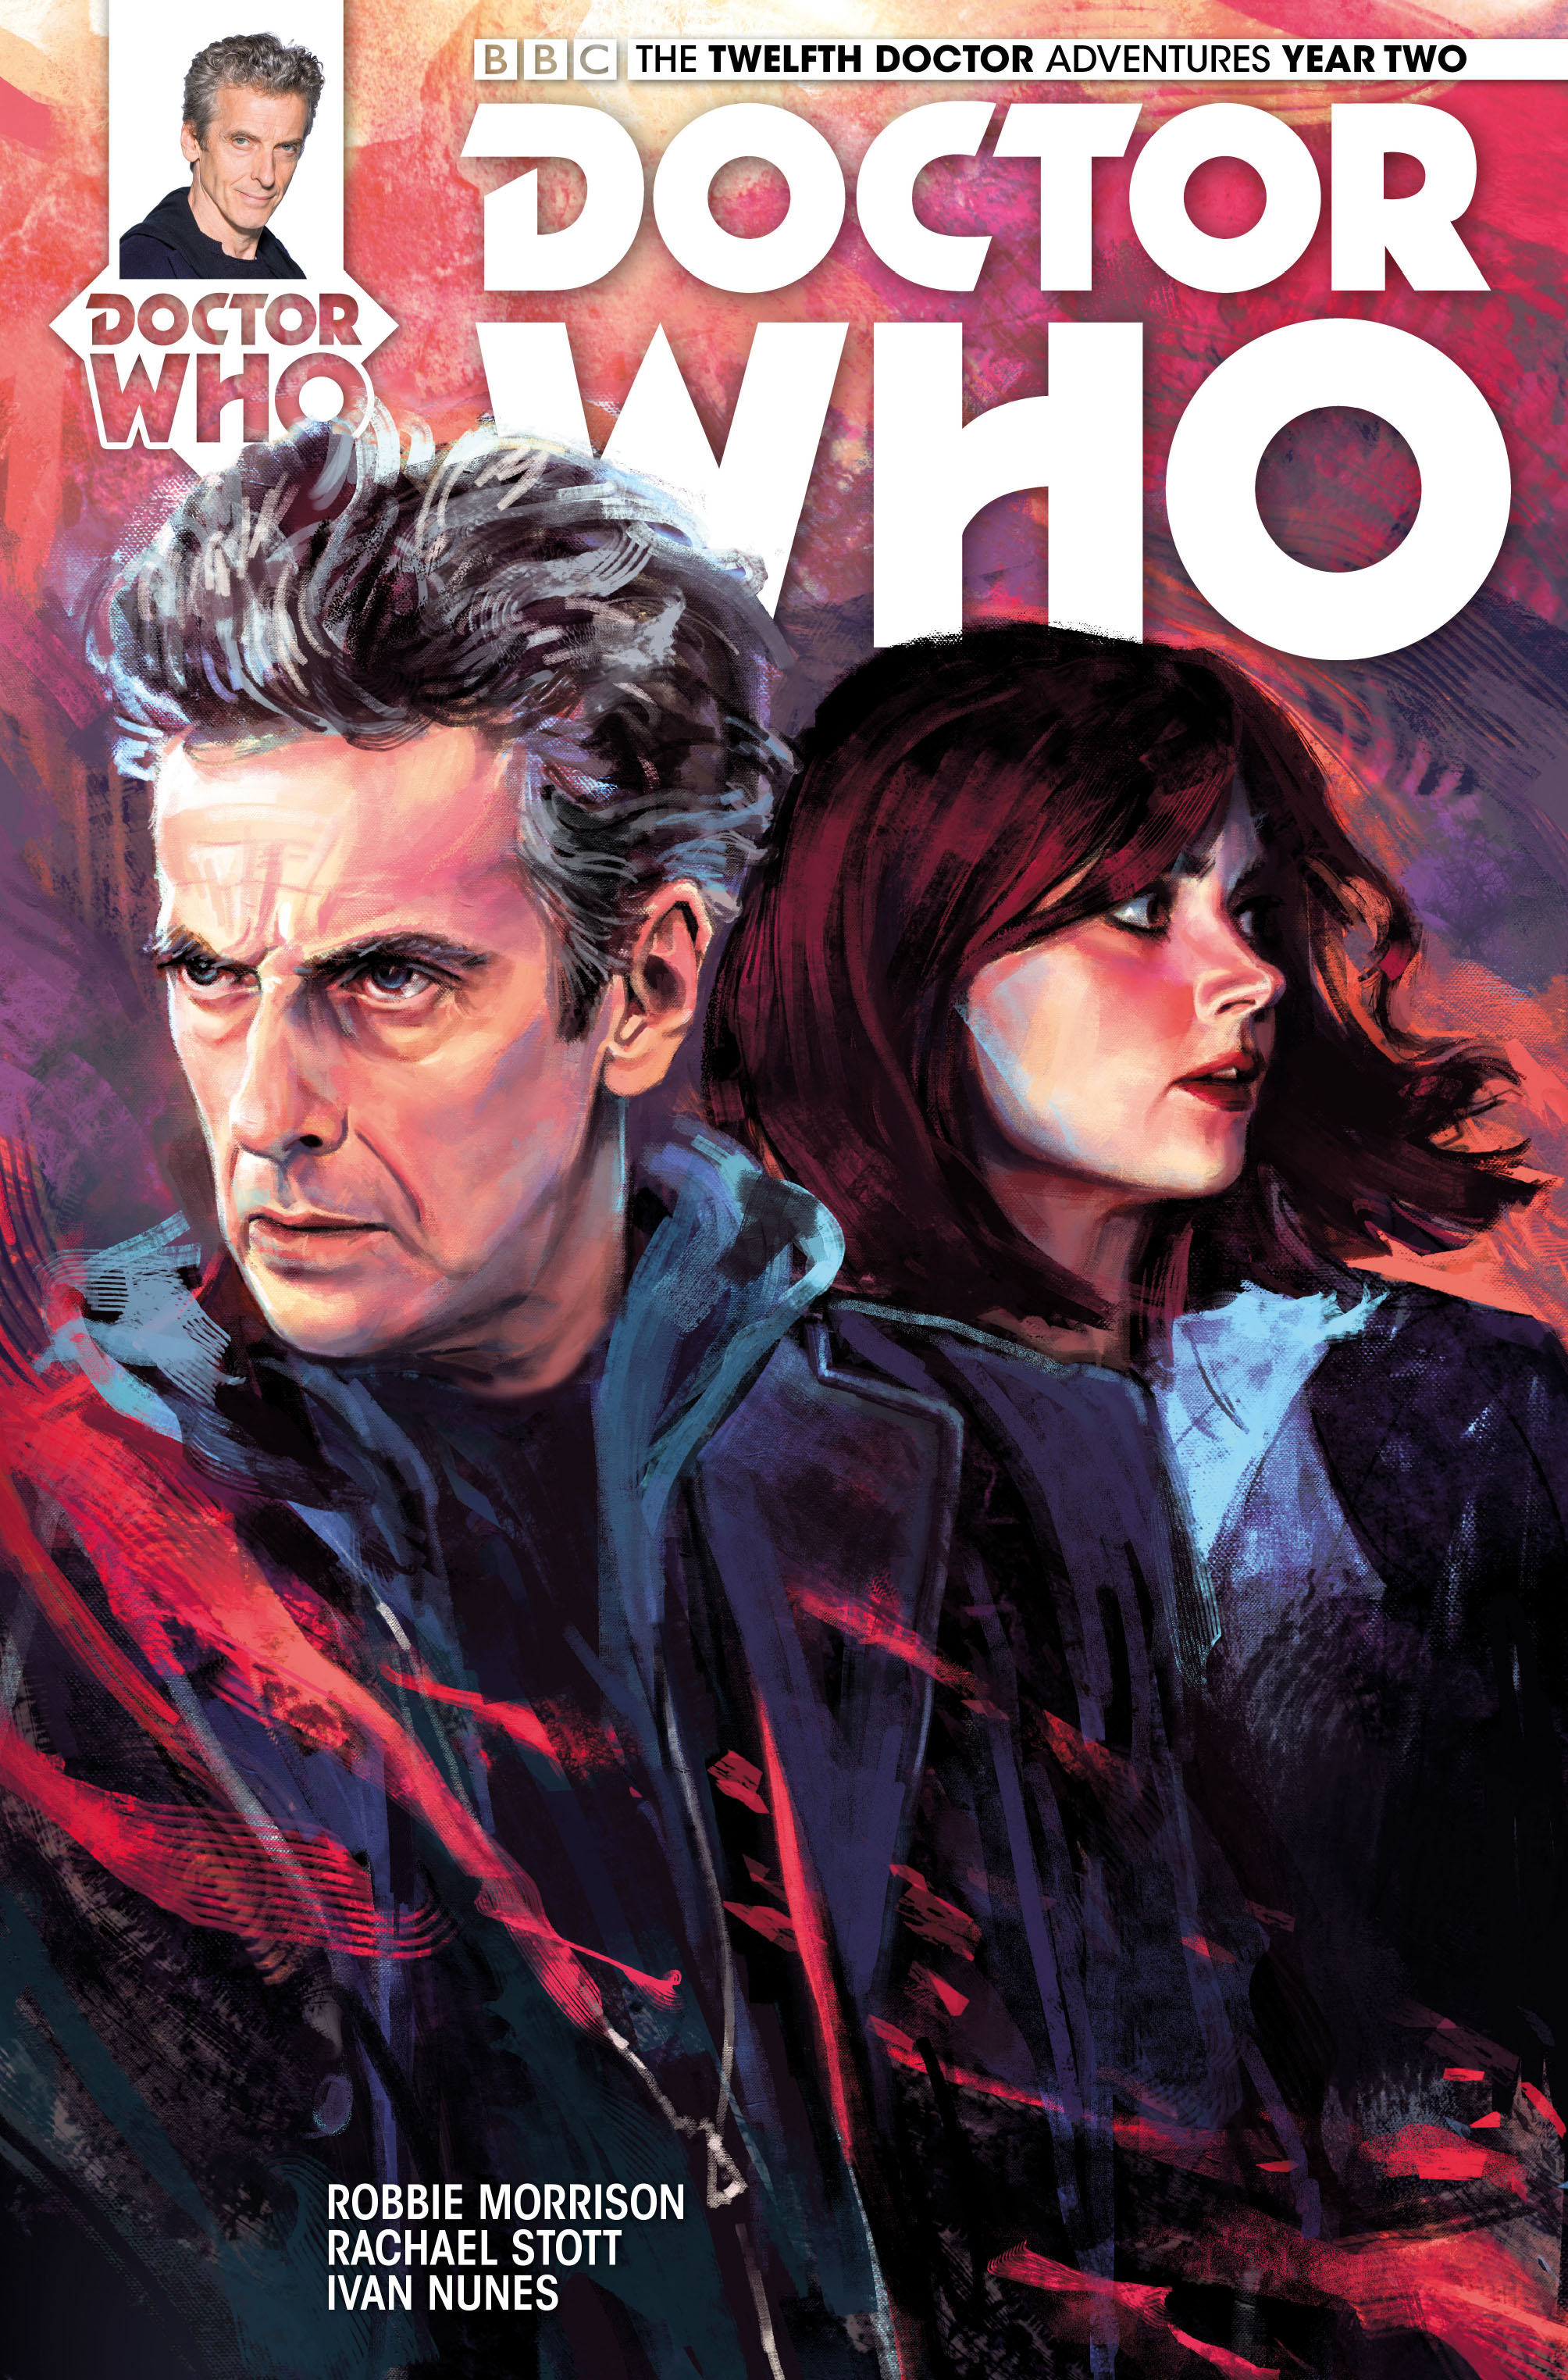 Doctor Who: The Twelfth Doctor – Year Two #1 -Cover A